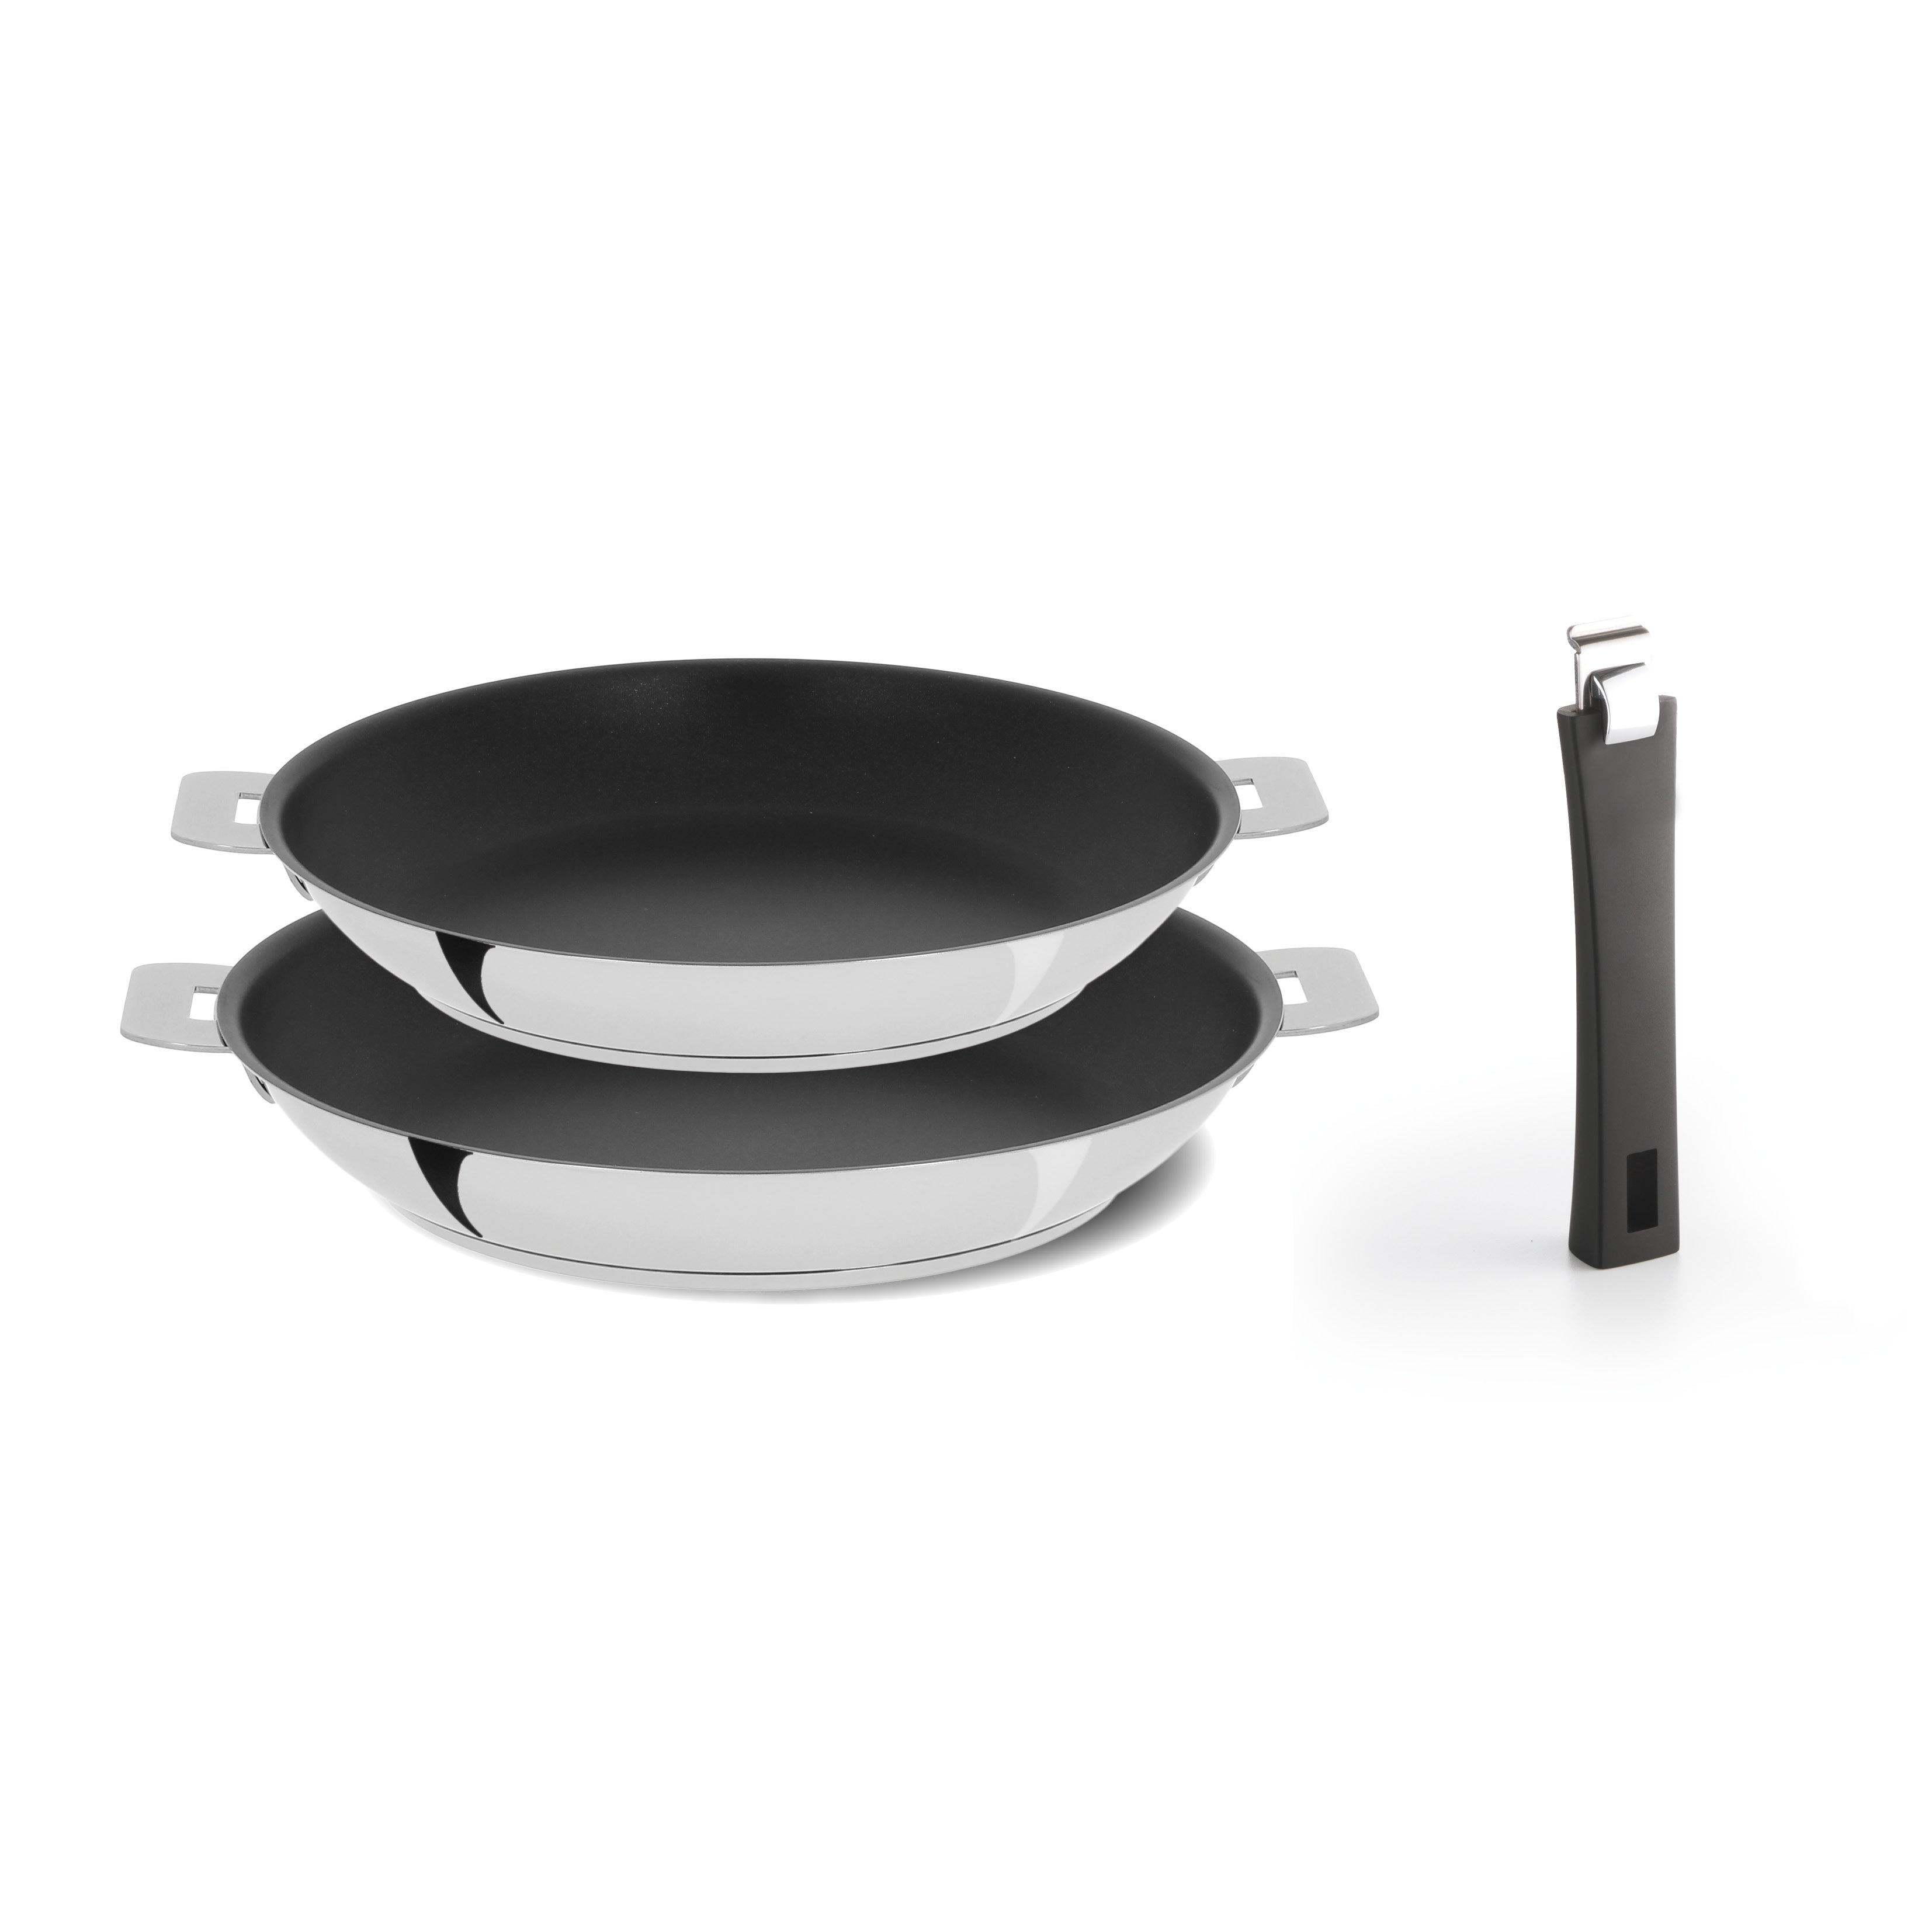 Cristel Stainless Steel Cookware Set 11 Piece Black Removable Handles